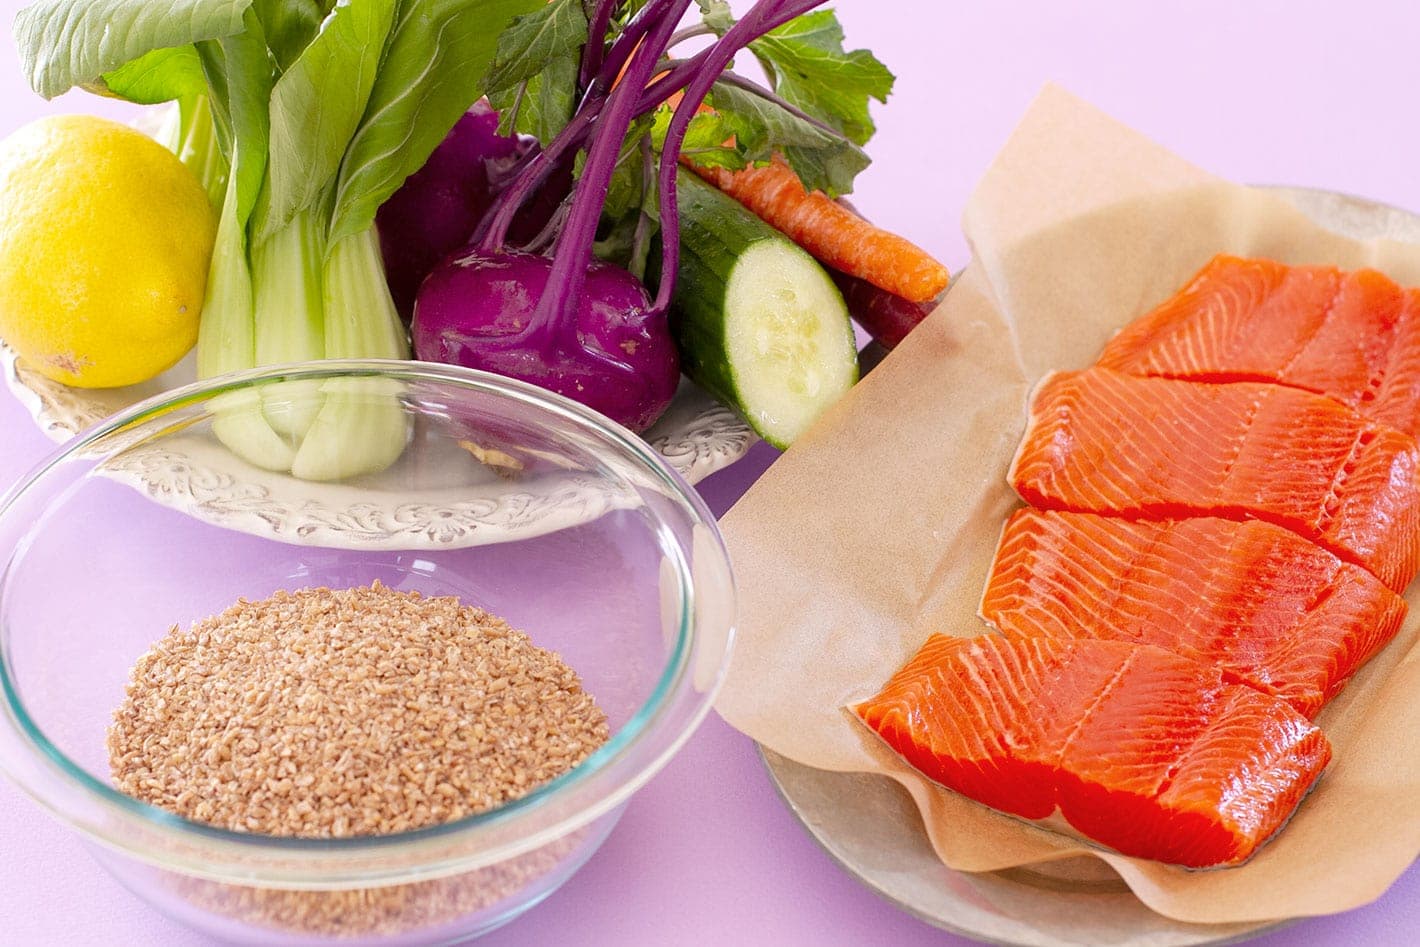 Ingredients for salmon grain bowl recipe sitting on a pastel purple surface - a bowl of bulgur, raw salmon fillets on a sheet tray, and fresh baby bok choy, kohlrabi, cucumber, carrots, and a lemon on a white plate.